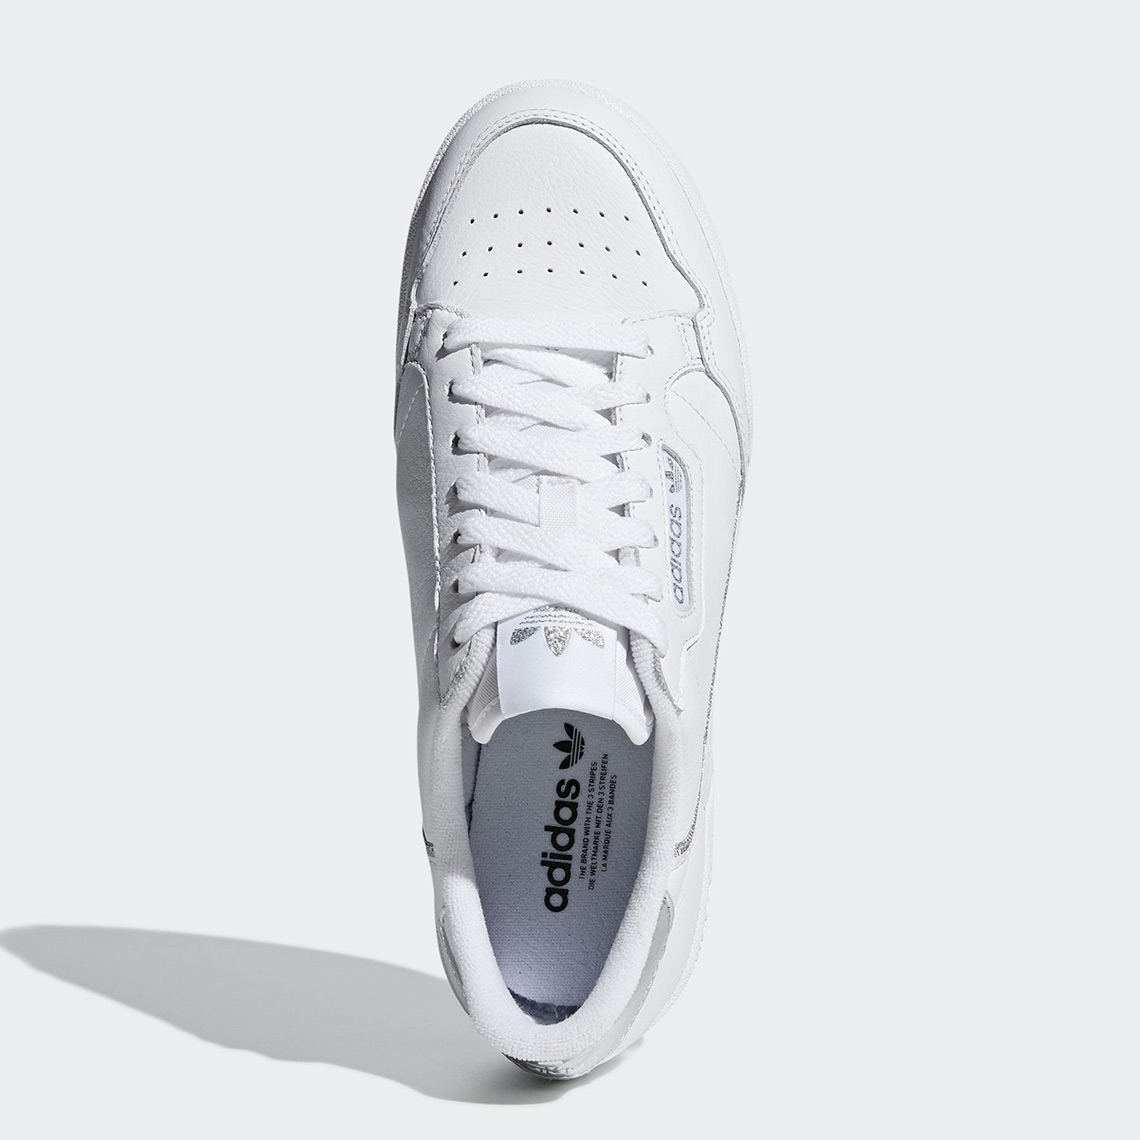 adidas Continental 80 EE8925 Release Info | SneakerNews.com